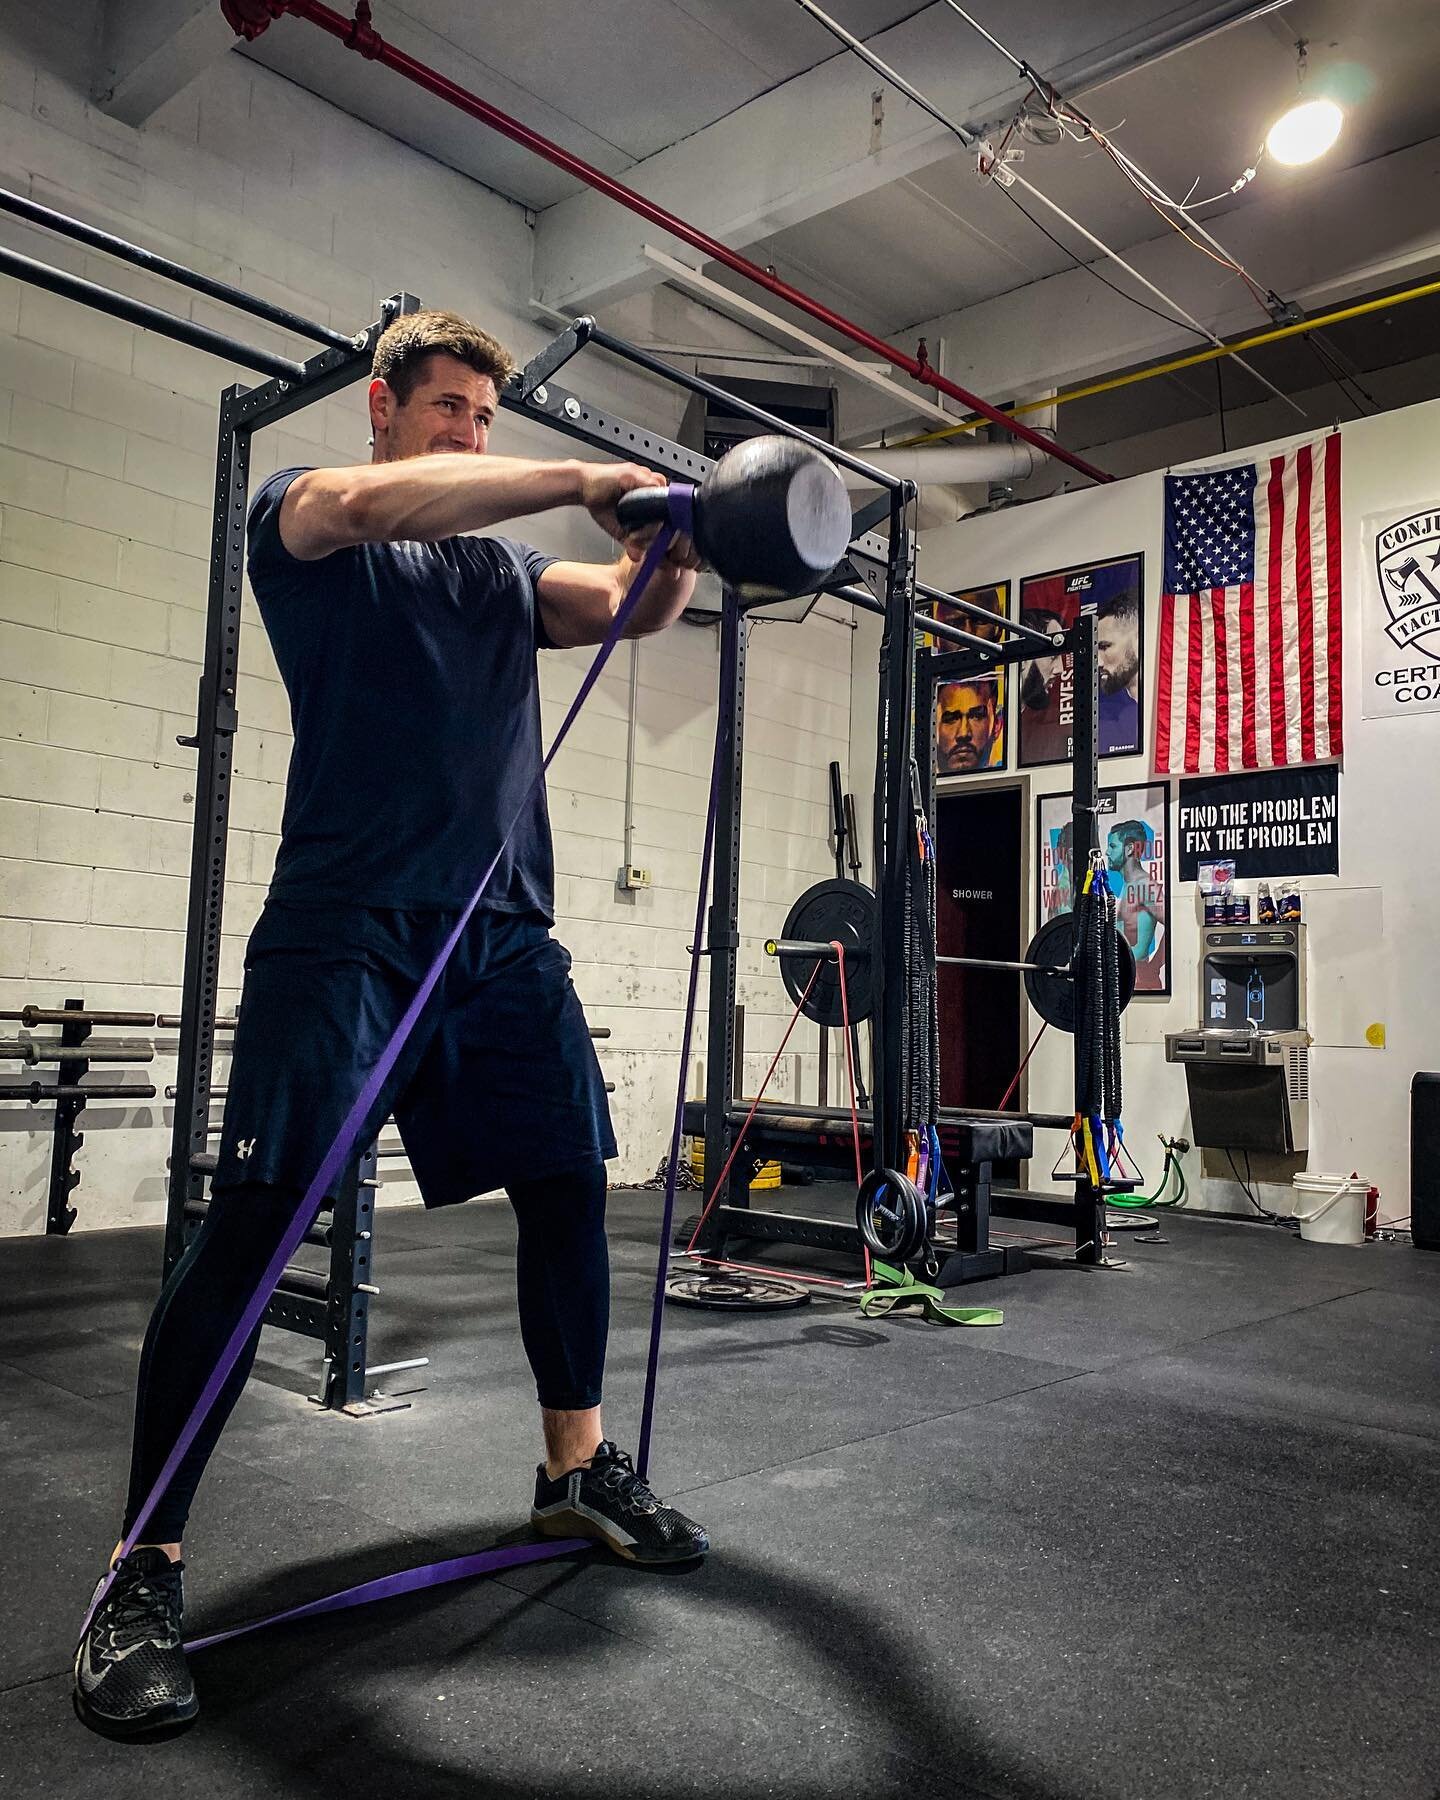 There are many components that go into a proper training program for speed. One crucial method at the center of speed work is overspeed eccentrics. This involves the use of bands specifically. The bands constitute extra kinetic energy and drive the l